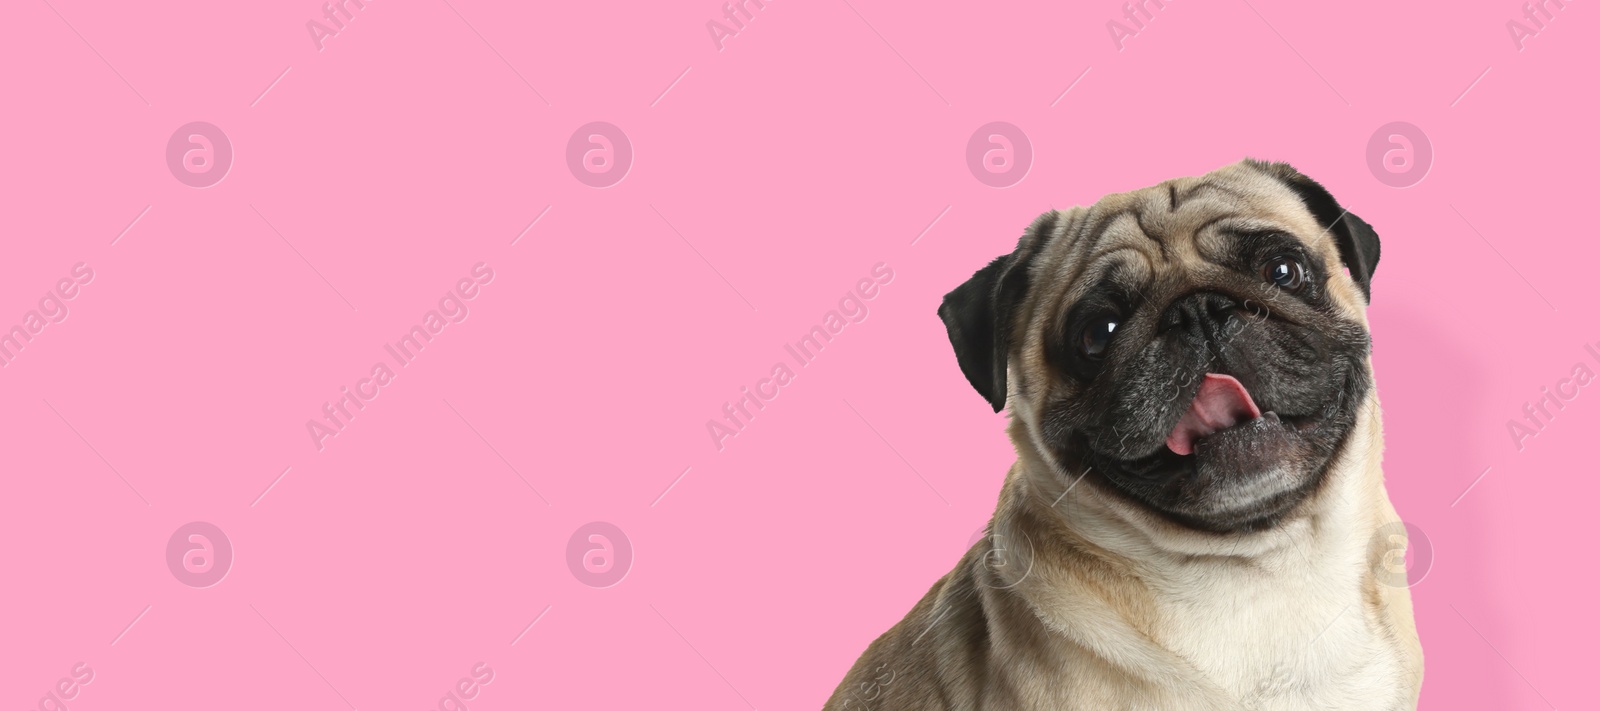 Image of Happy pet. Cute Pug dog smiling on pink background, space for text. Banner design